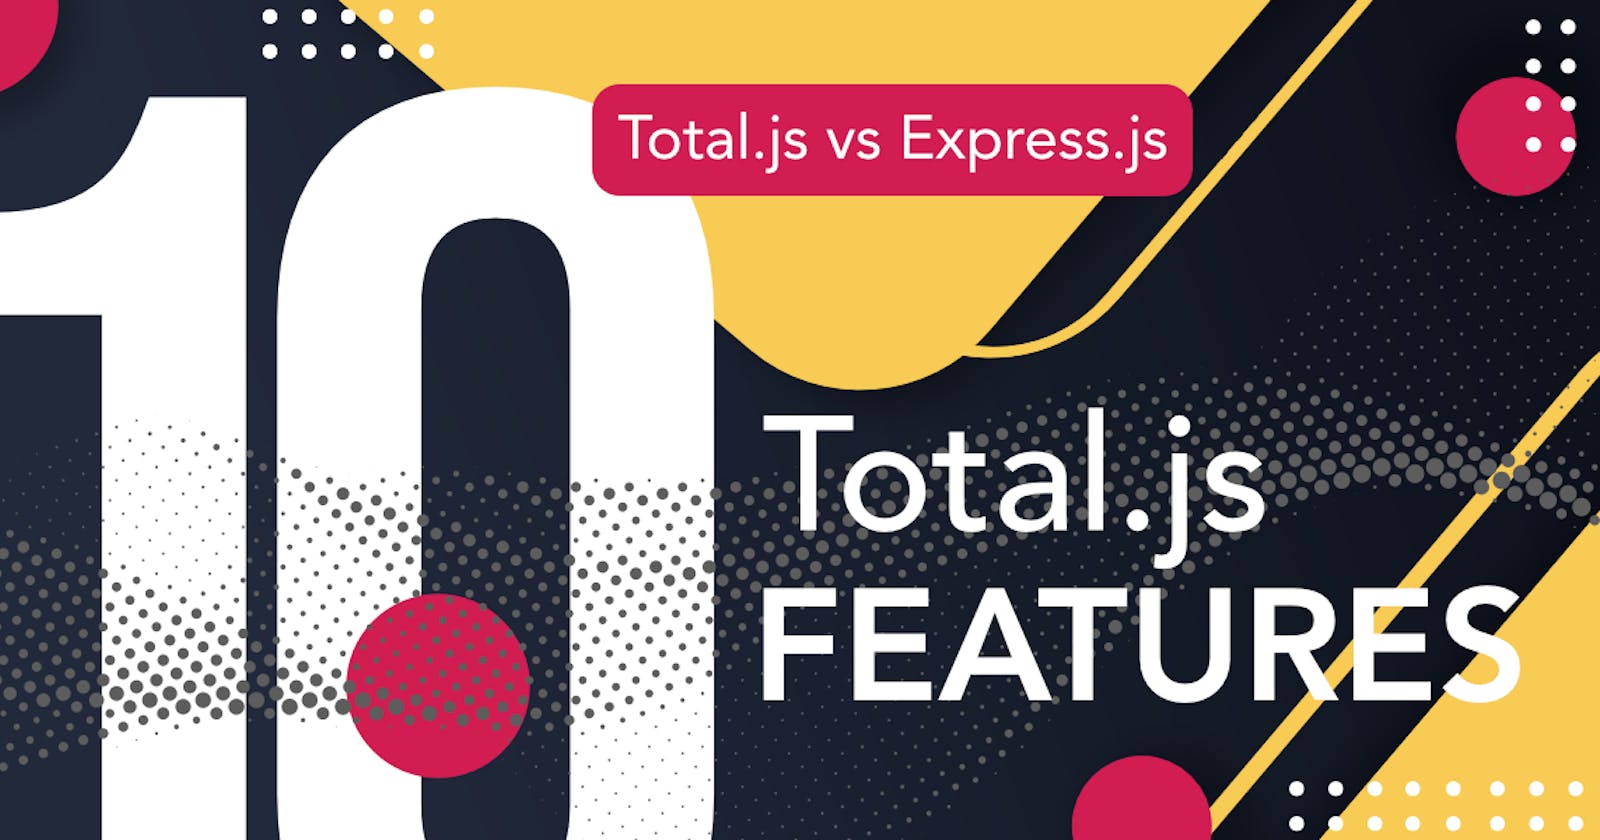 10 Total.js features to use in your next Express.js application.